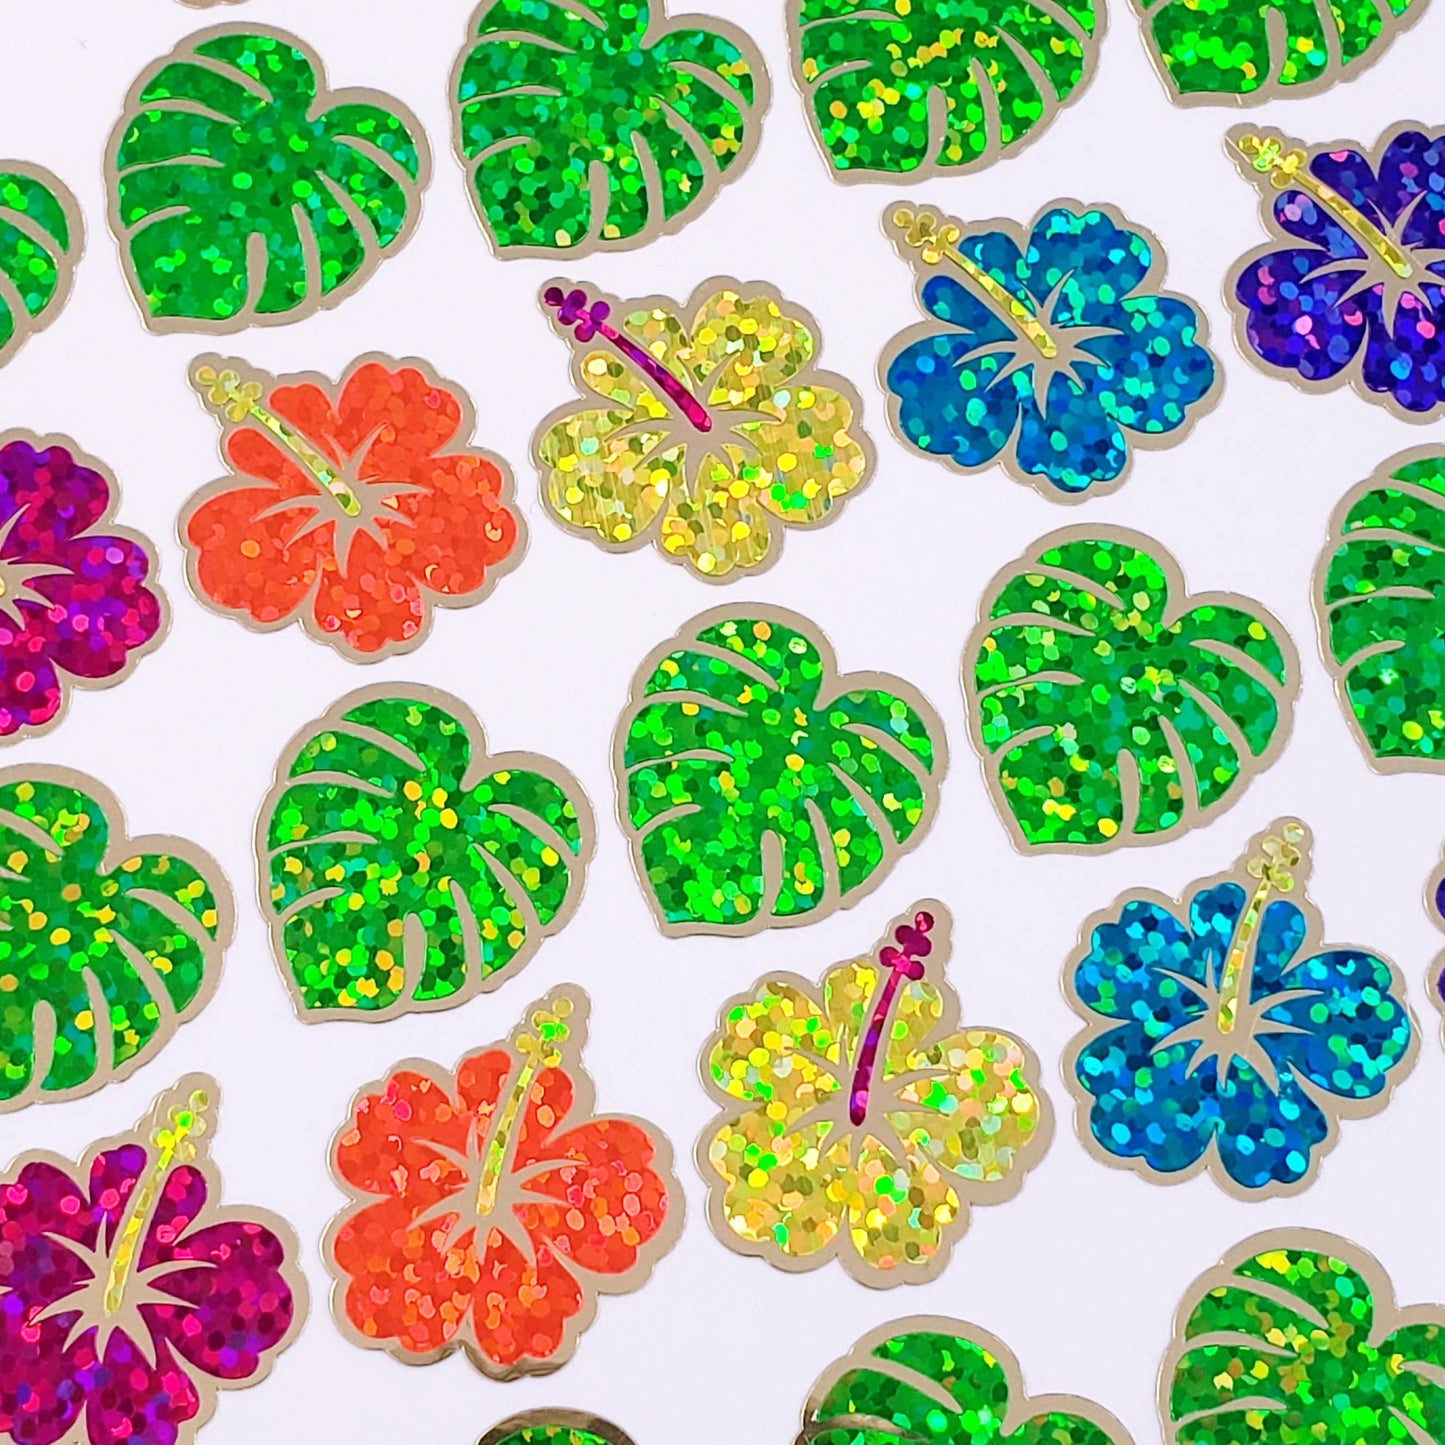 Tropical Flower Glitter Stickers, set of 20 hibiscus flower blooms and 15 monstera leaf stickers for journals, stationery, and envelopes.